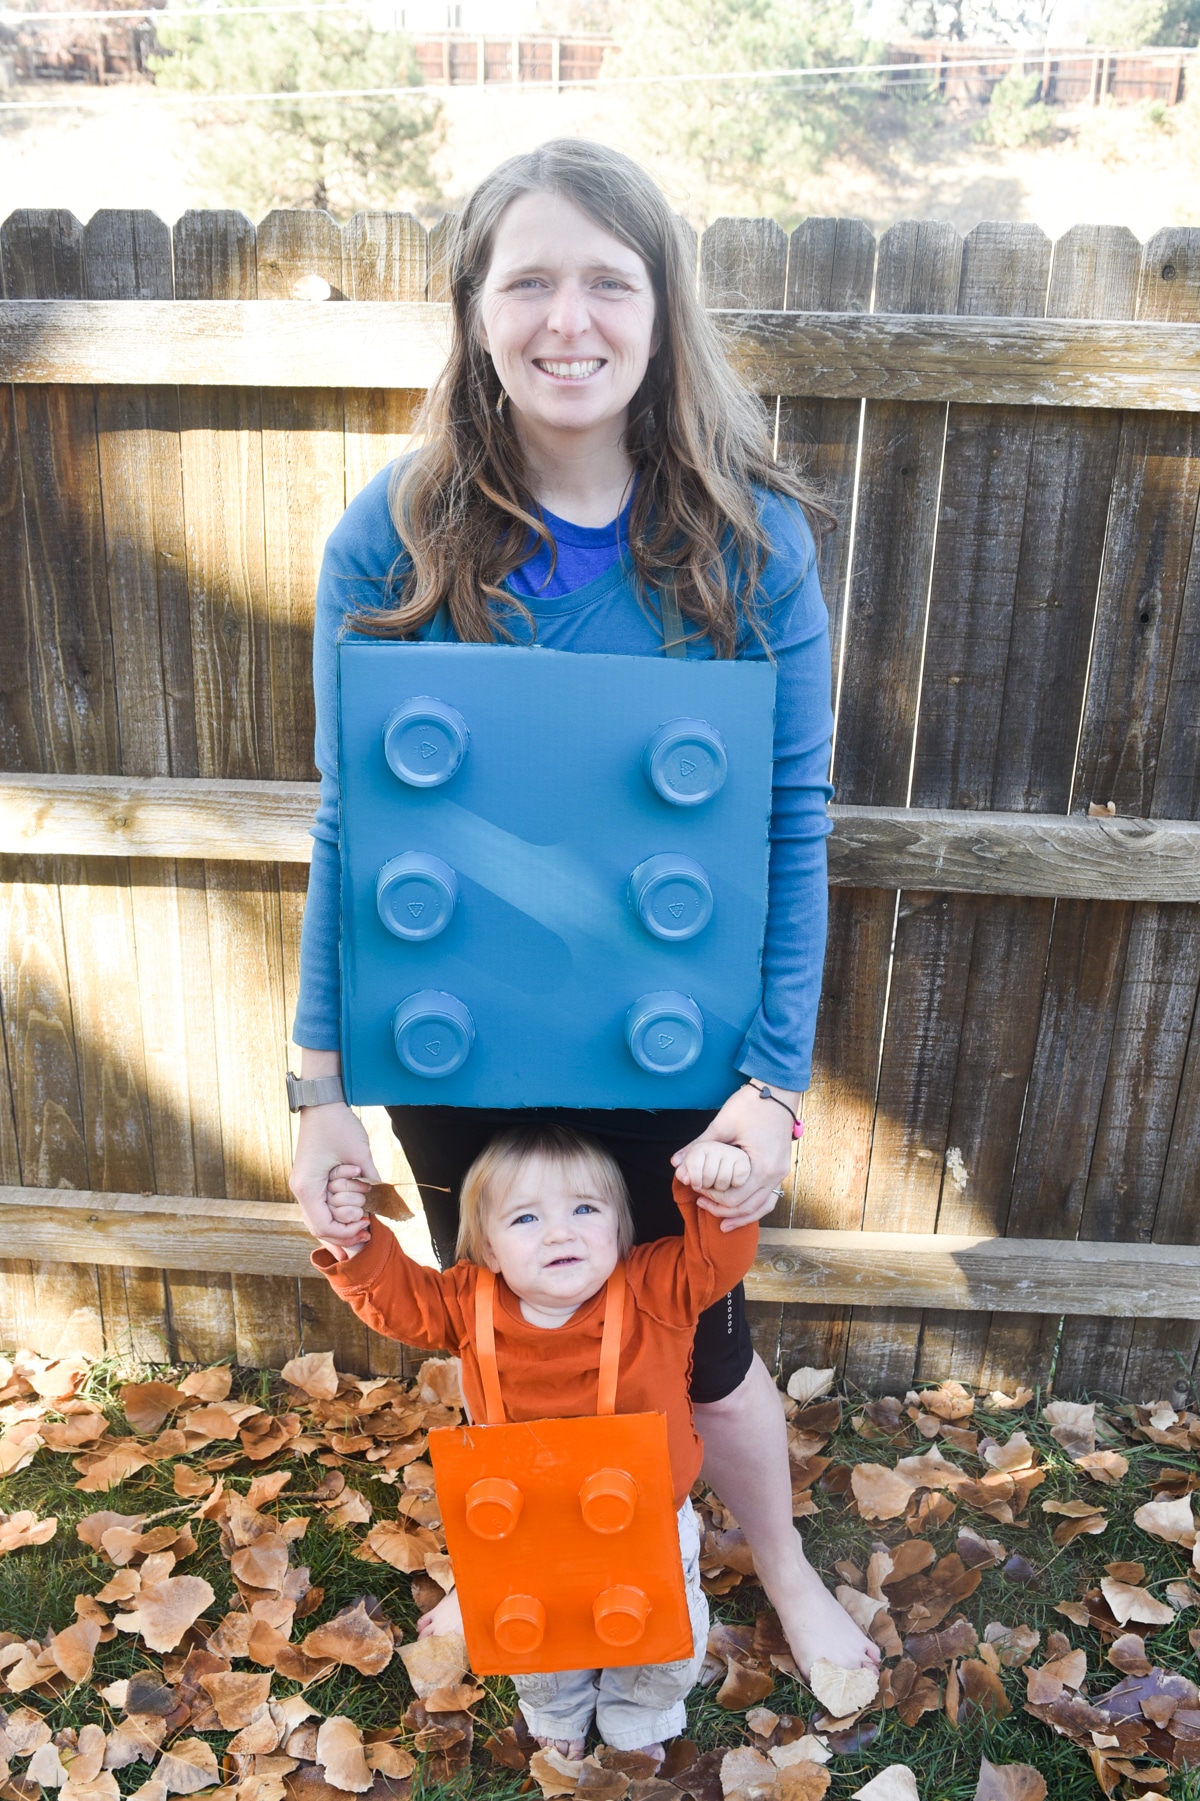 Lego Boy & Brick Costumes for Kids, Coolest DIY Costumes